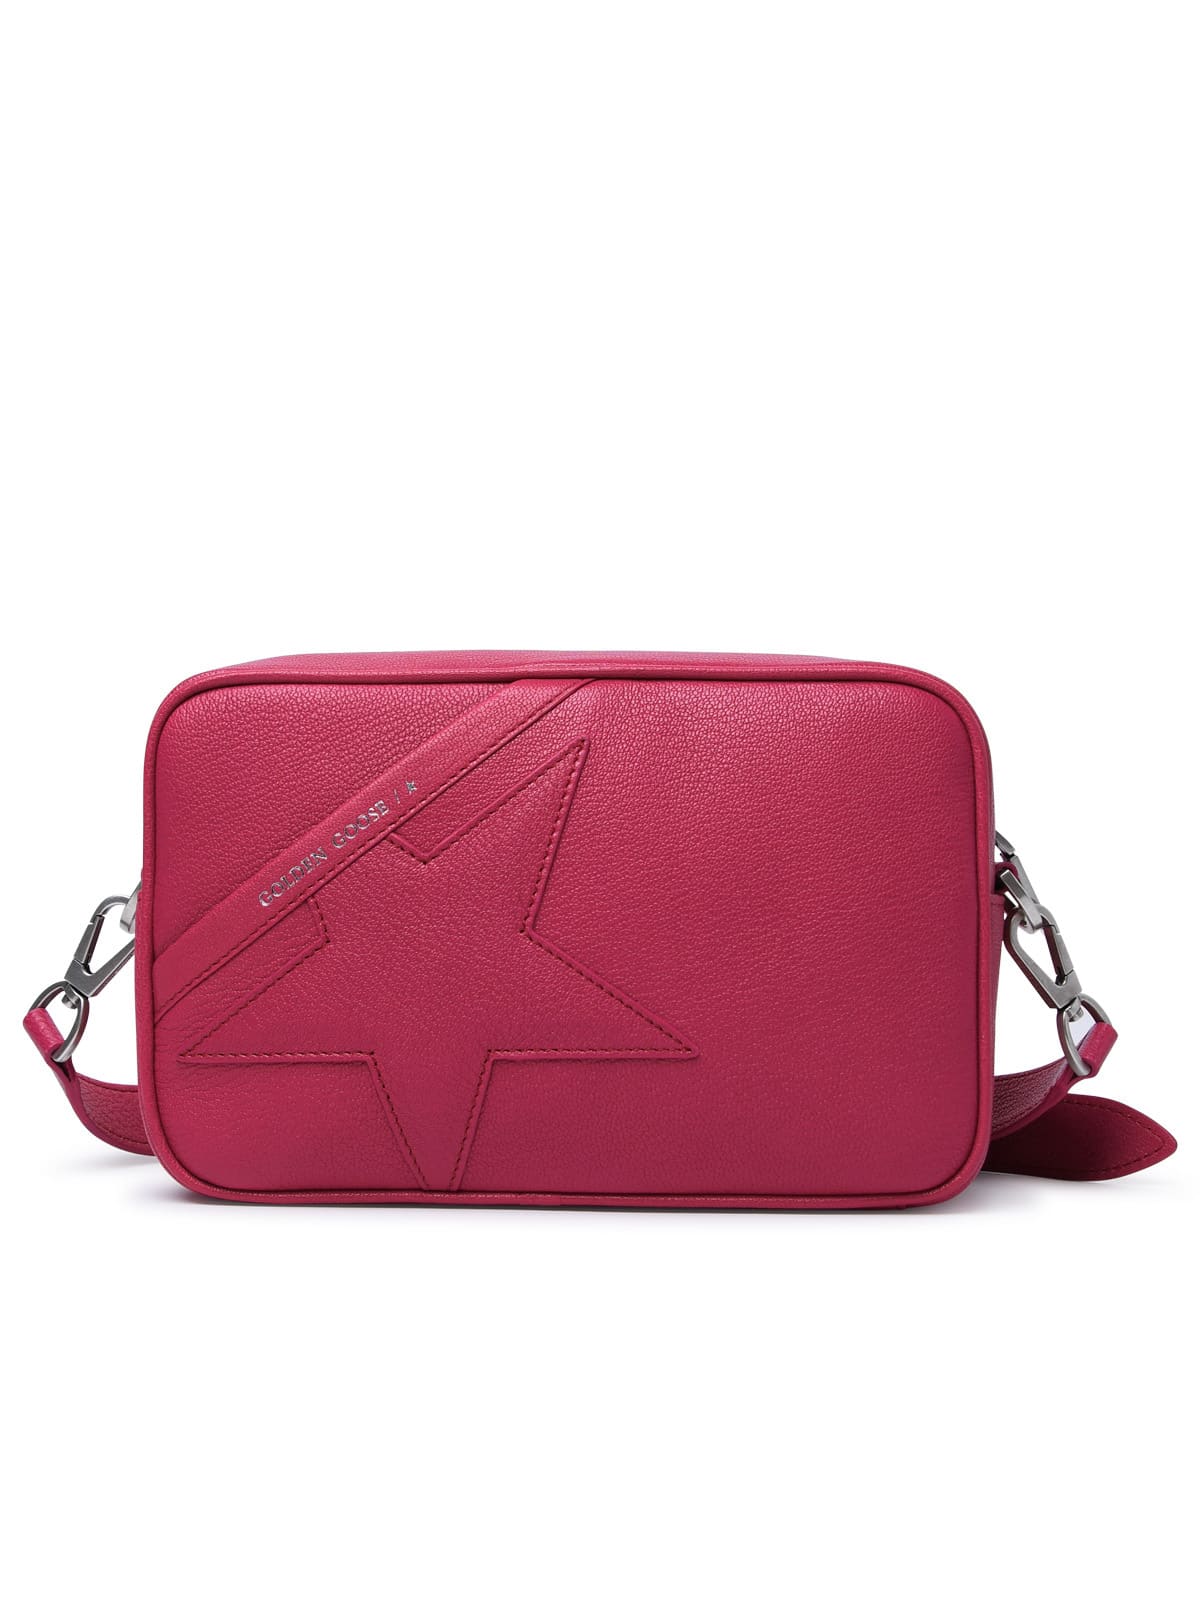 Golden Goose star Hibiscus Leather Bag